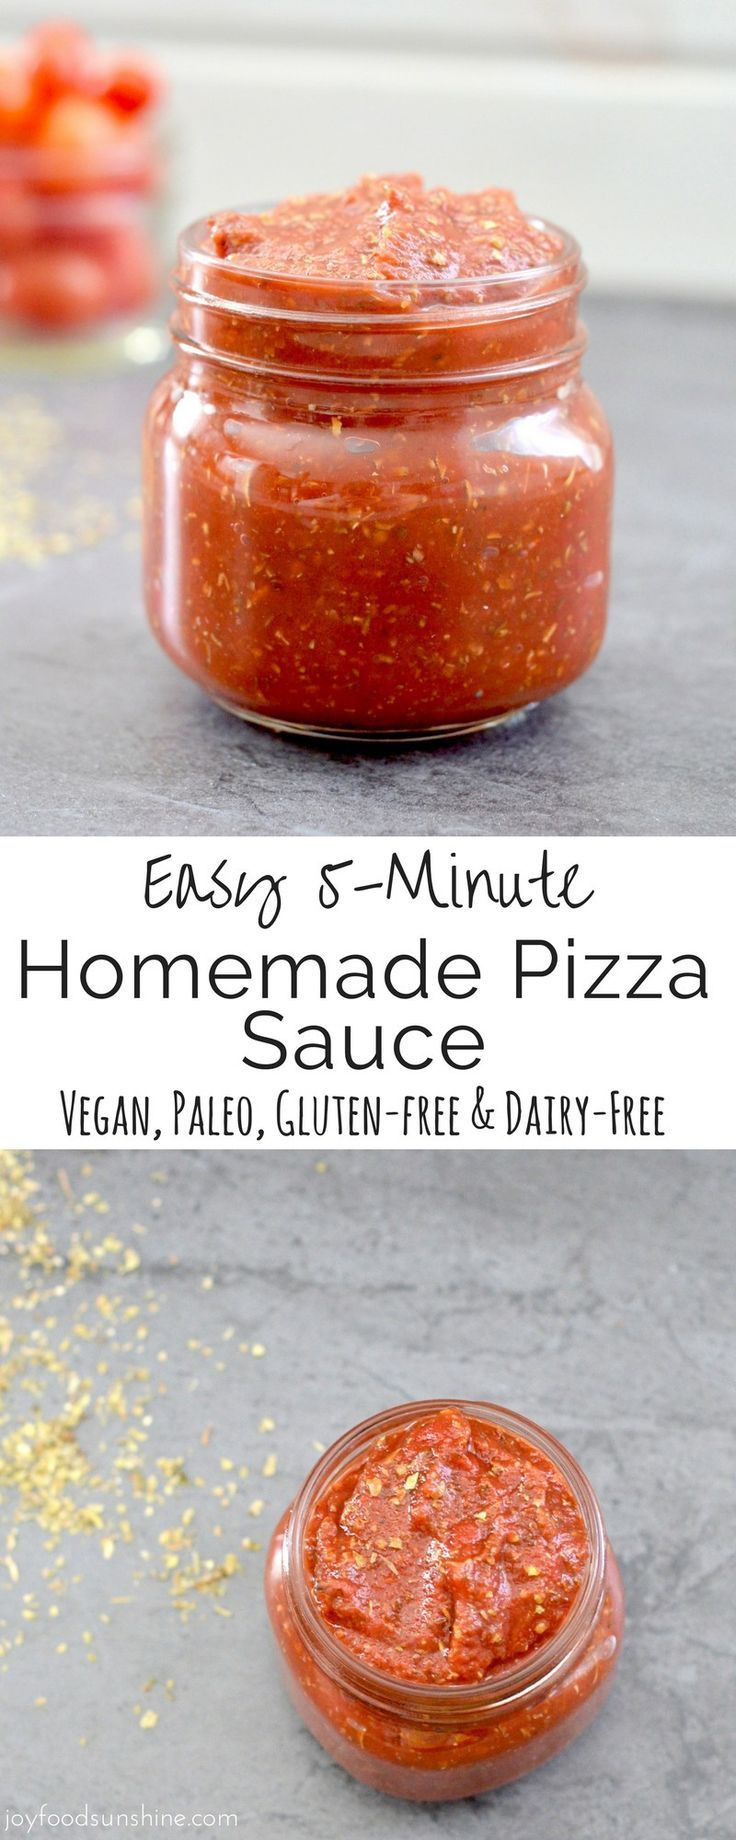 Healthy Homemade Pizza Sauce
 25 best ideas about Healthy homemade pizza on Pinterest